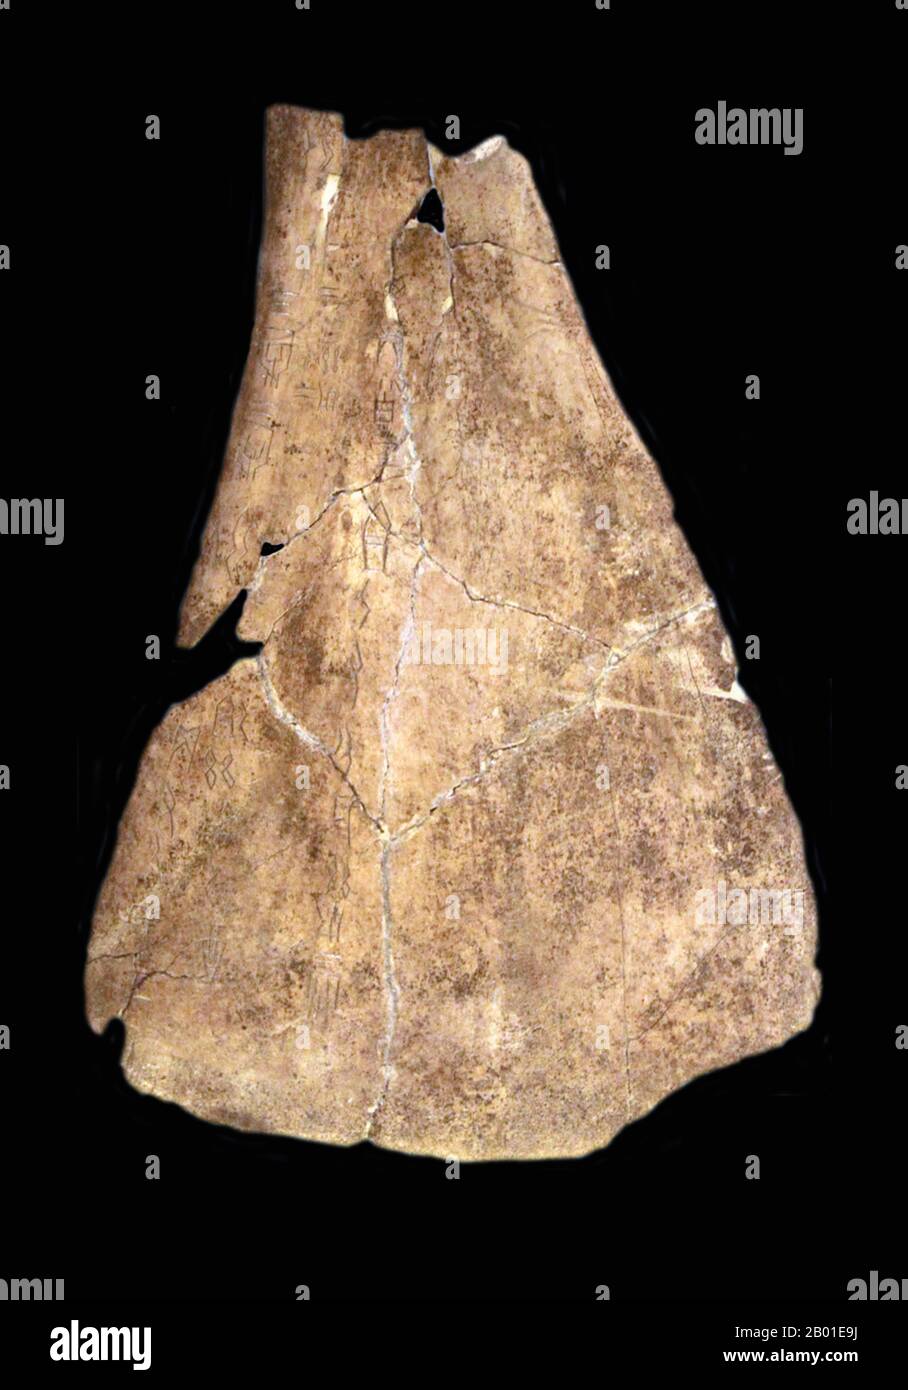 China: An ox scapula oracle bone divining future good or bad fortune. Xiaotun, Anyang County, Henan Province, c. 1300-1050 BCE.  Oracle bone inscriptions (Chinese: 甲骨; pinyin: jiǎgǔ) are the ancient Chinese characters carved on animal scapulas (shoulder blades) or turtle plastron (underside).  The oracle bone inscriptions were mainly used for divination and keeping records of events that happened in the late Shang Dynasty (c. 1300-1050 BCE). Stock Photo